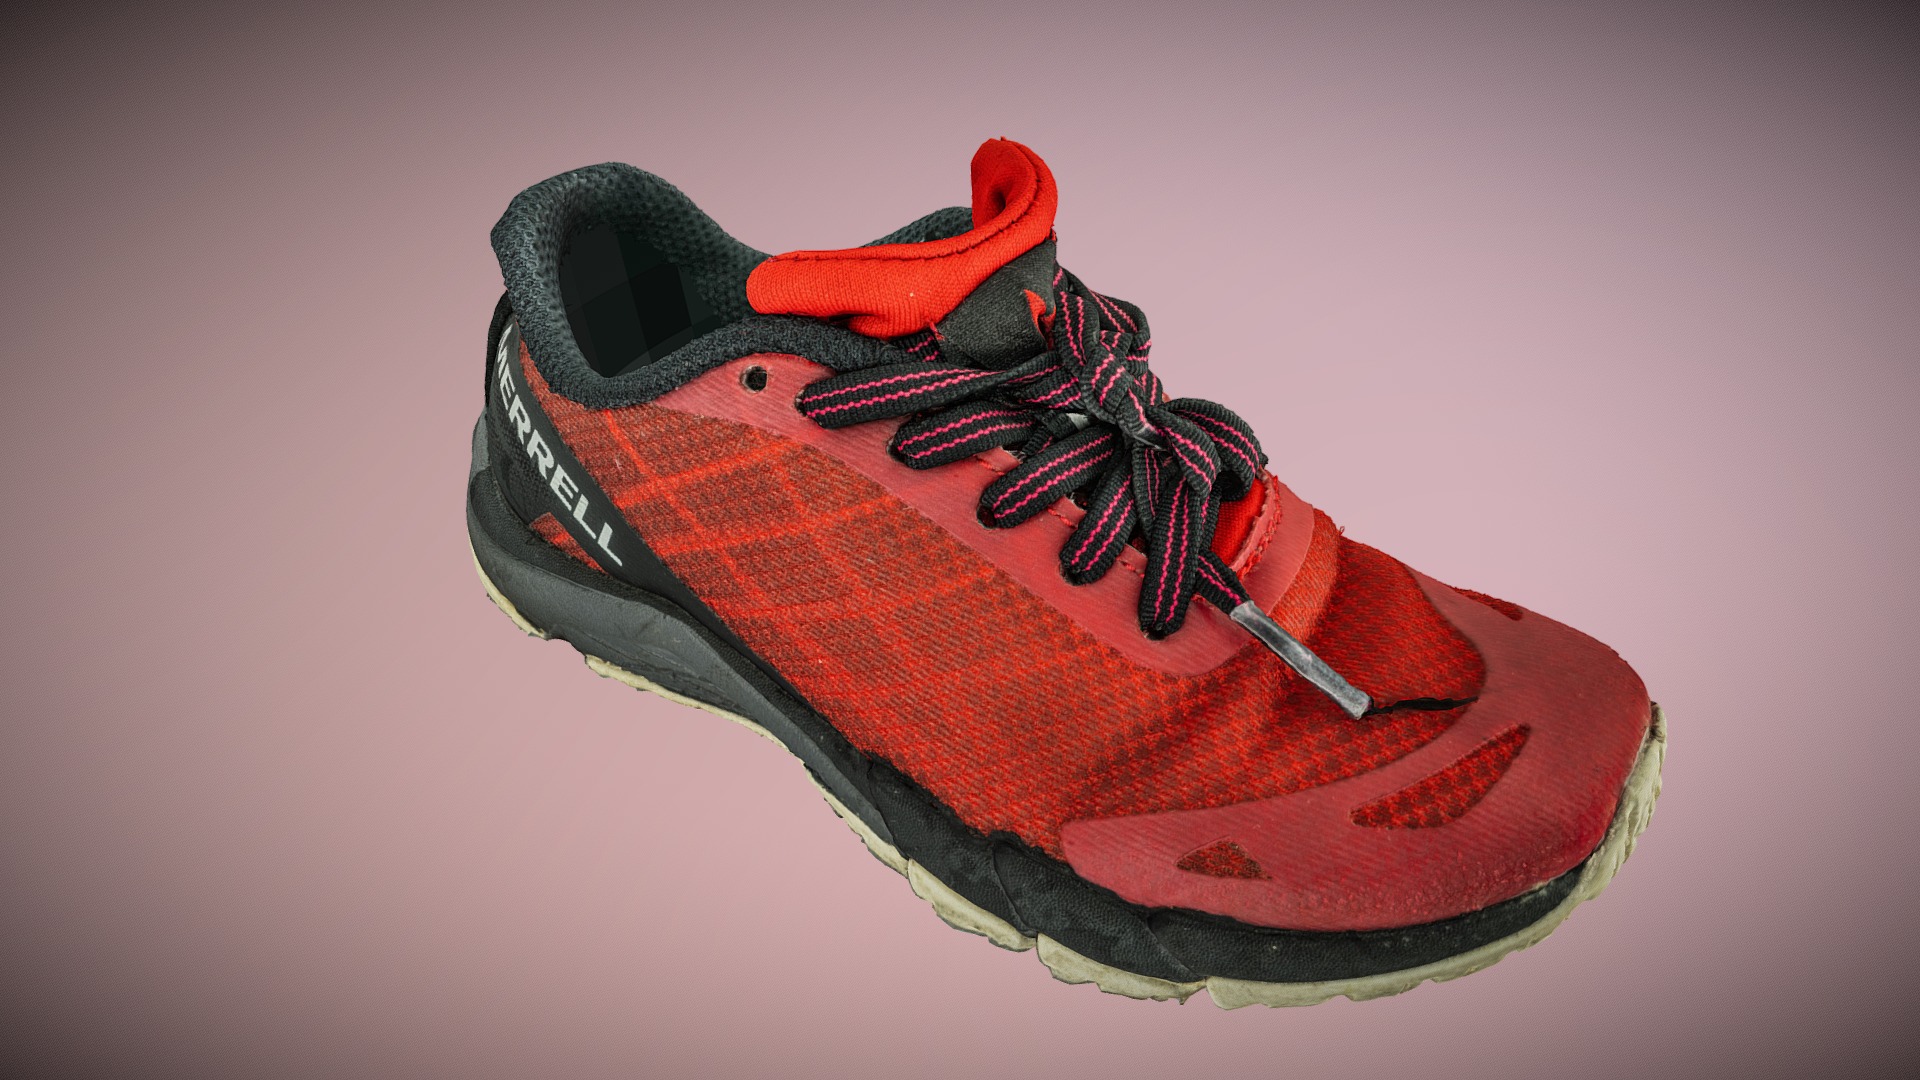 3D model Merrell Bare Acces kid shoe photogrammetry scan - This is a 3D model of the Merrell Bare Acces kid shoe photogrammetry scan. The 3D model is about a red and black shoe.